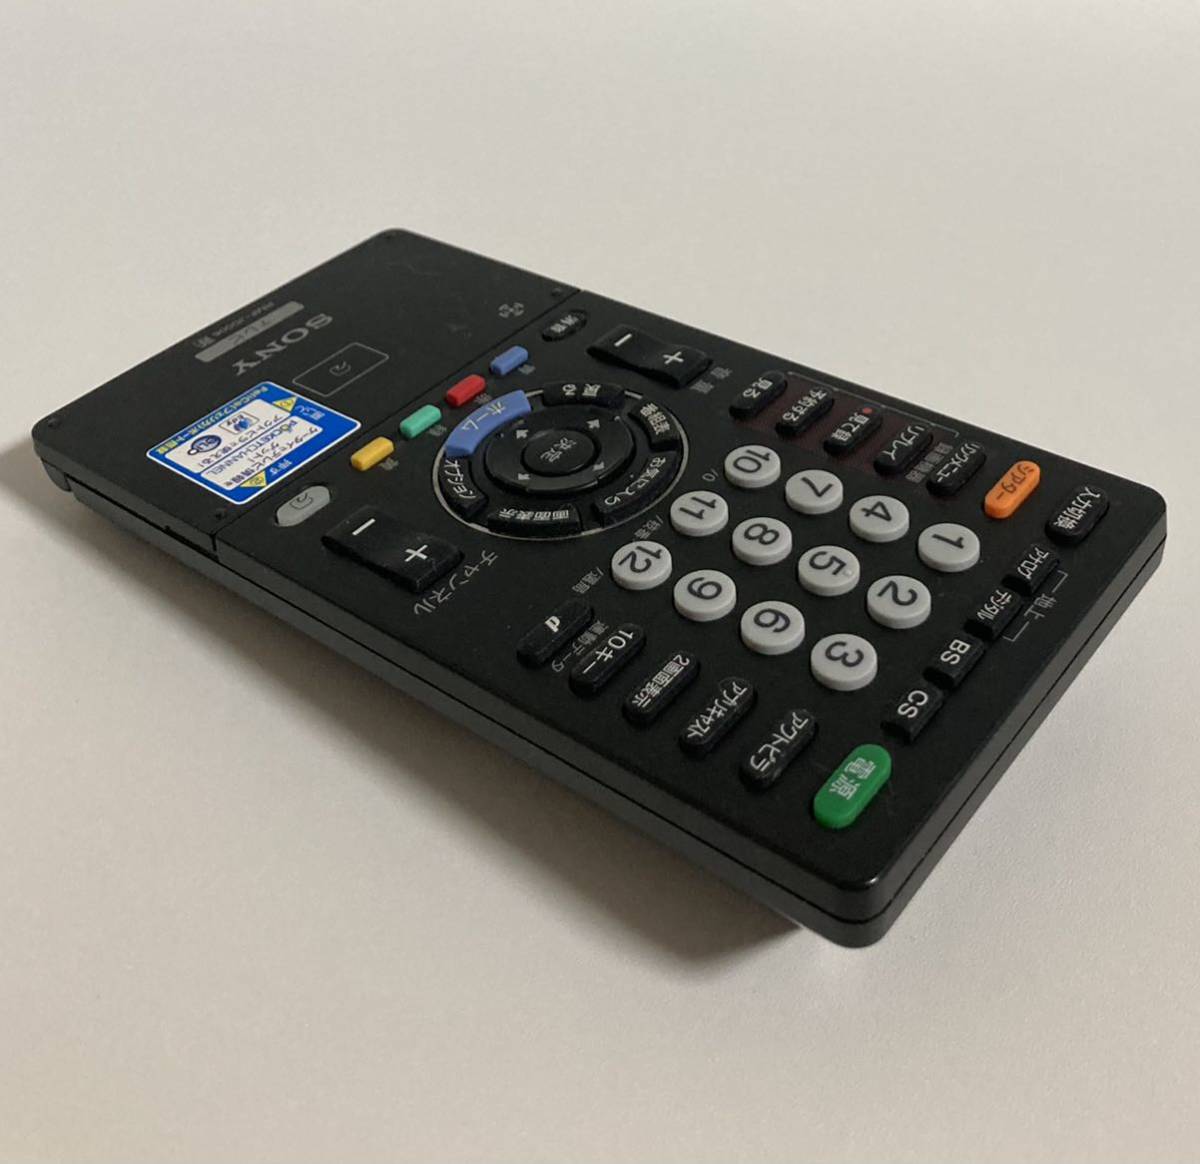 SONY RMF-JD006 ソニー テレビリモコン マルチリモコン 通電◯ 動作未チェック 現状品 product details | Yahoo!  Auctions Japan proxy bidding and shopping service | FROM JAPAN